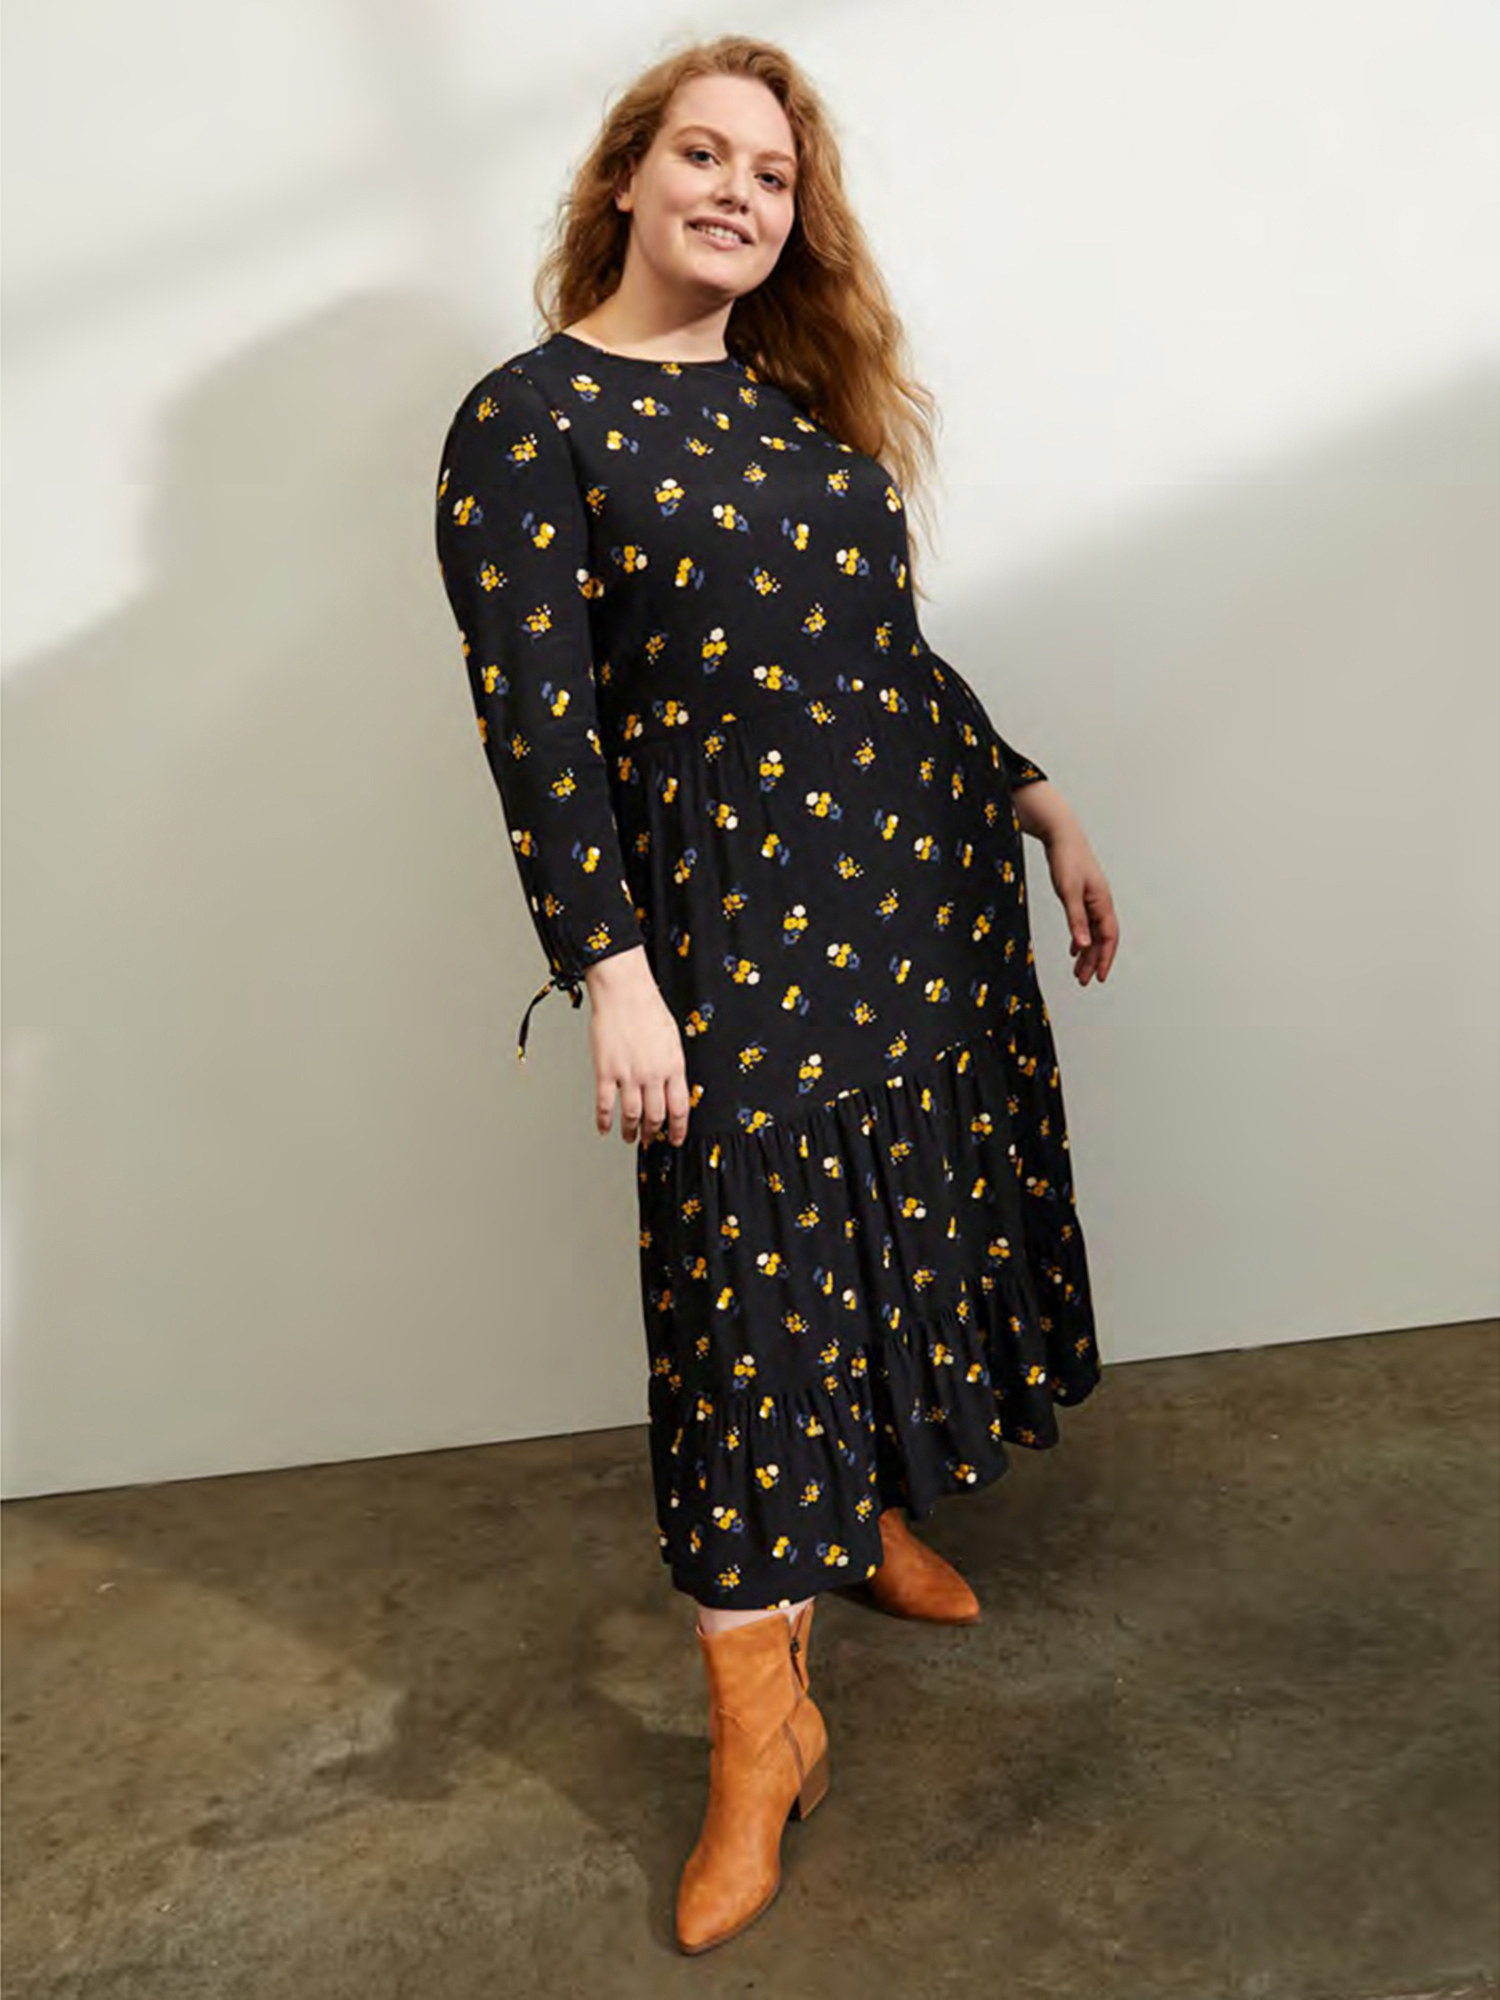 Model wears black dress with small yellow floral pattern